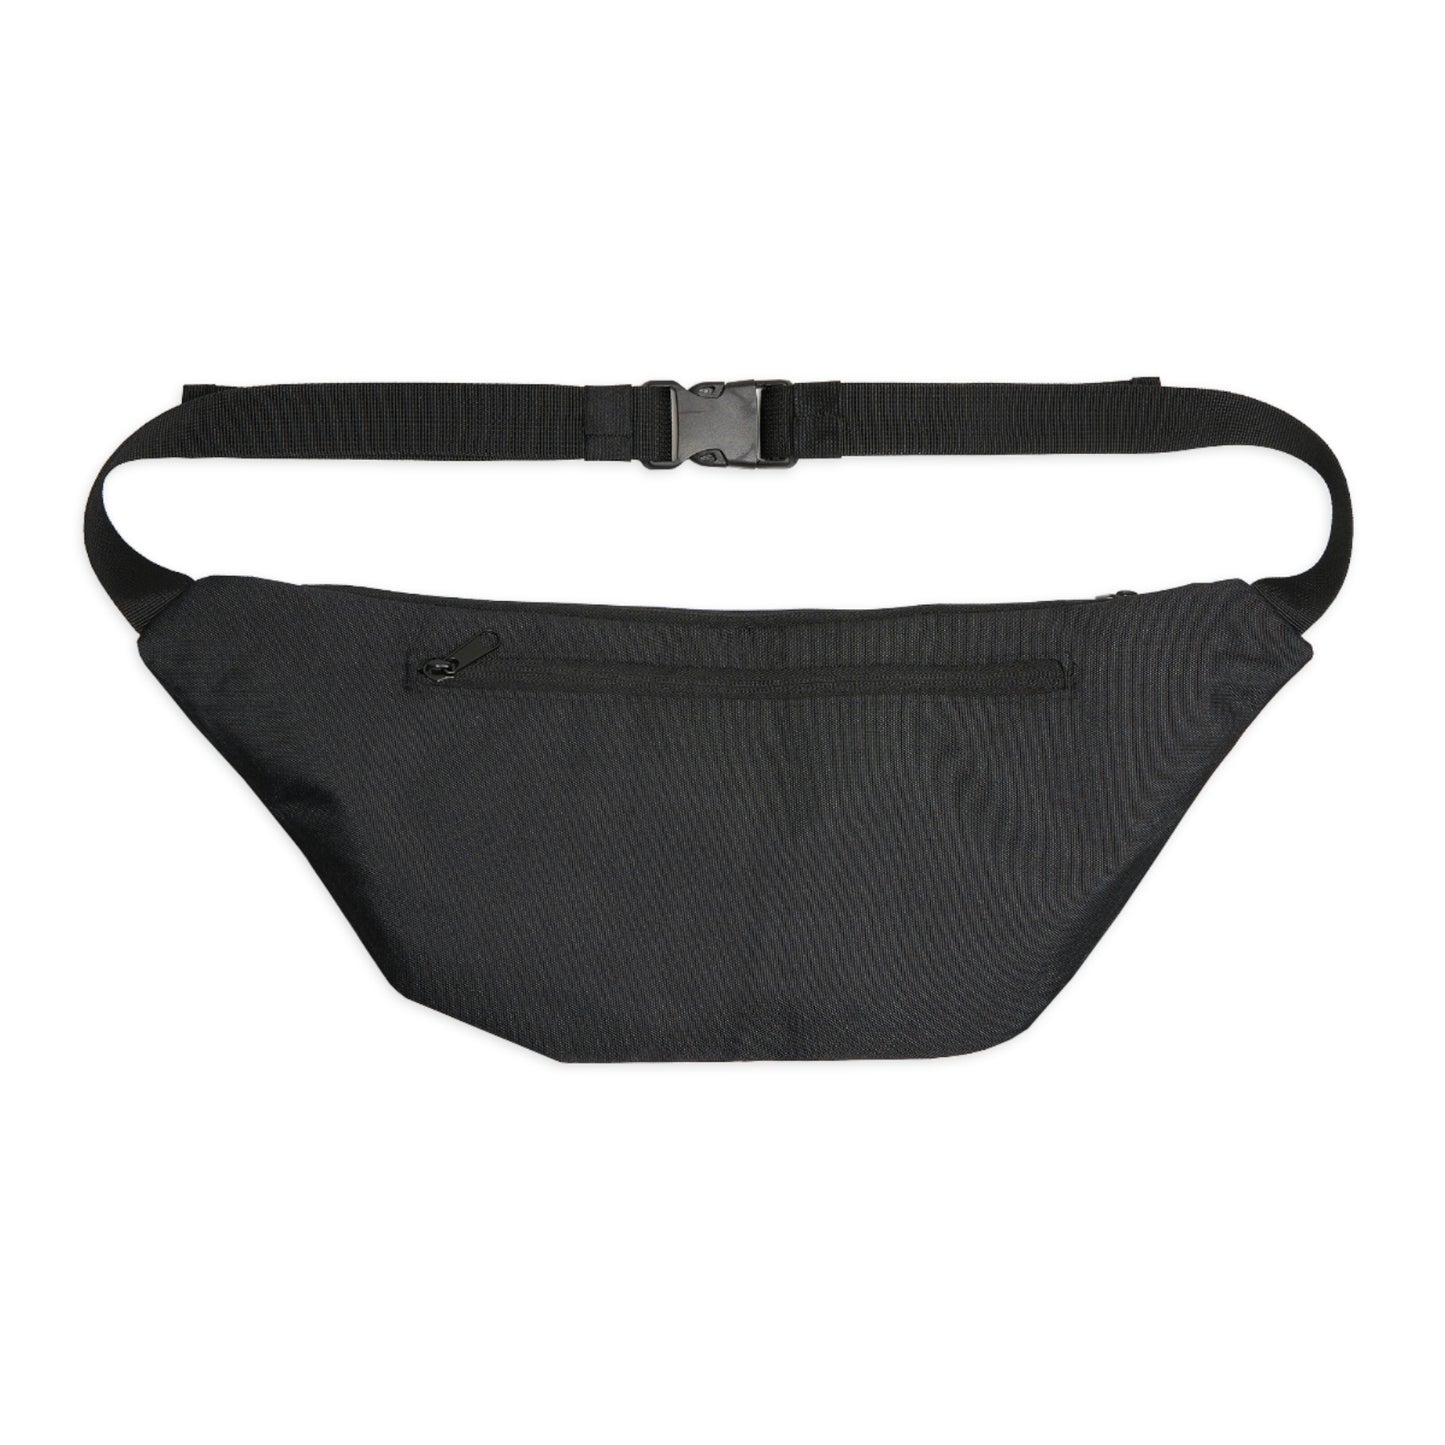 Large Silverback Submission Tactics Fanny Pack